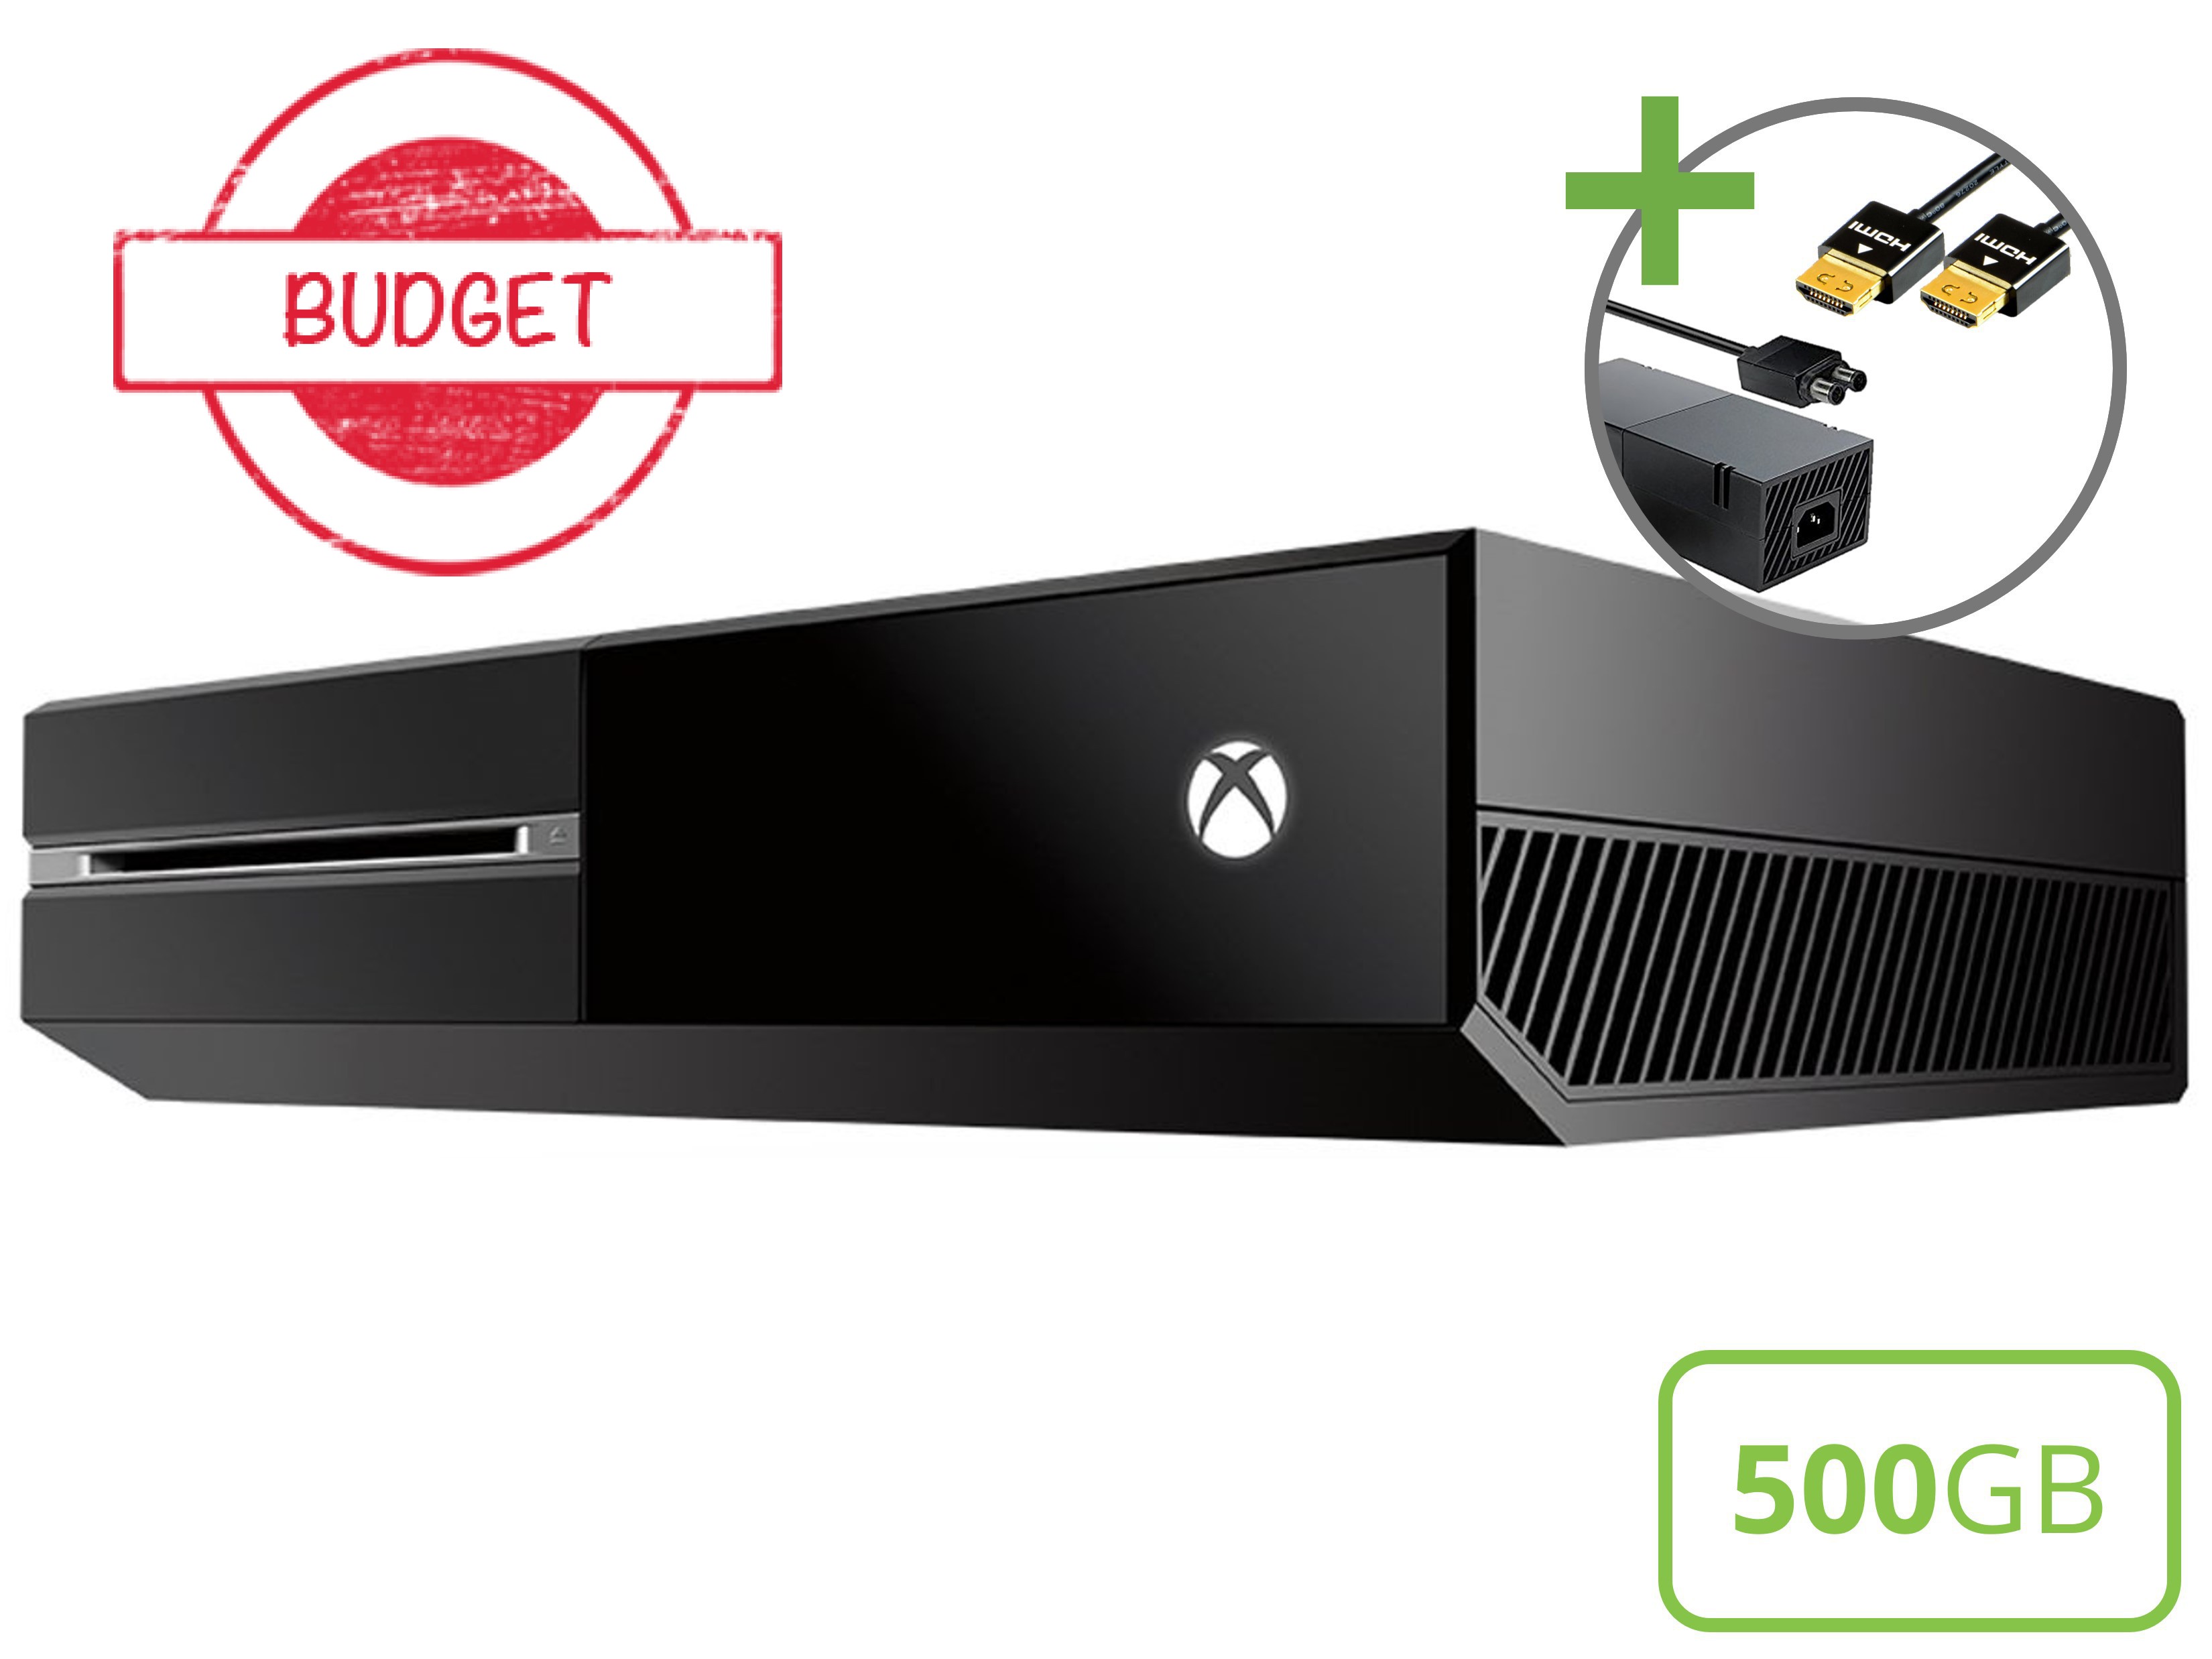 Microsoft Xbox One Starter Pack - 500GB The Witcher 3 Wild Hunt Edition - Budget - Xbox One Hardware - 2